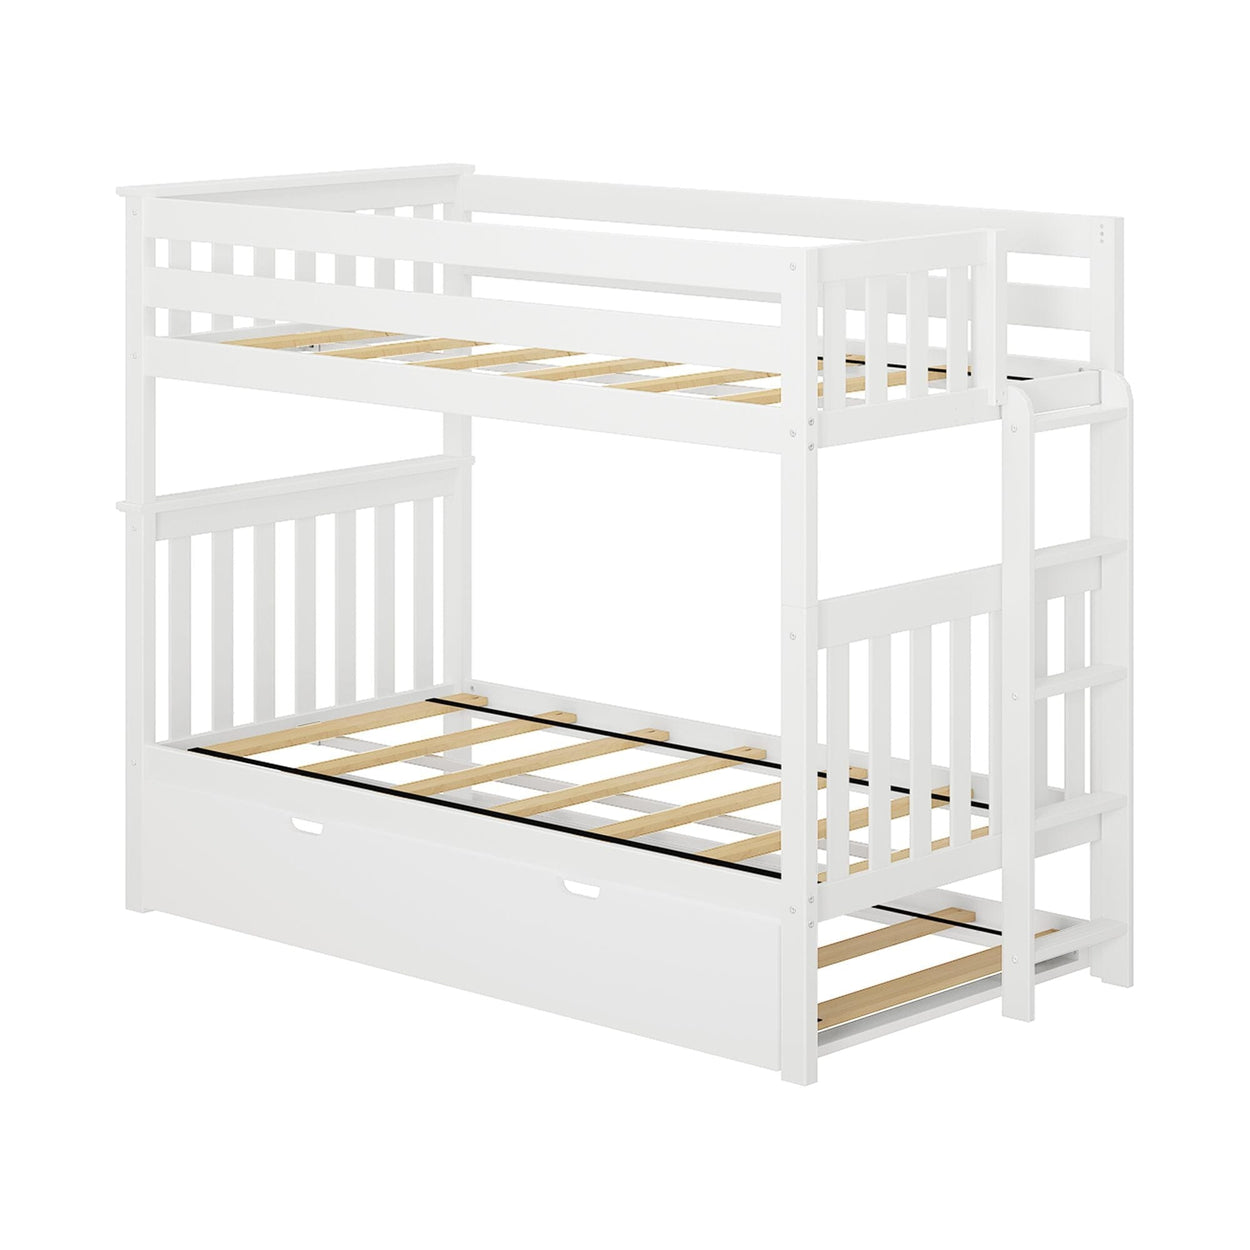 186305-002 : Bunk Beds Twin over Twin Bunk Bed with Ladder on End and Trundle, White